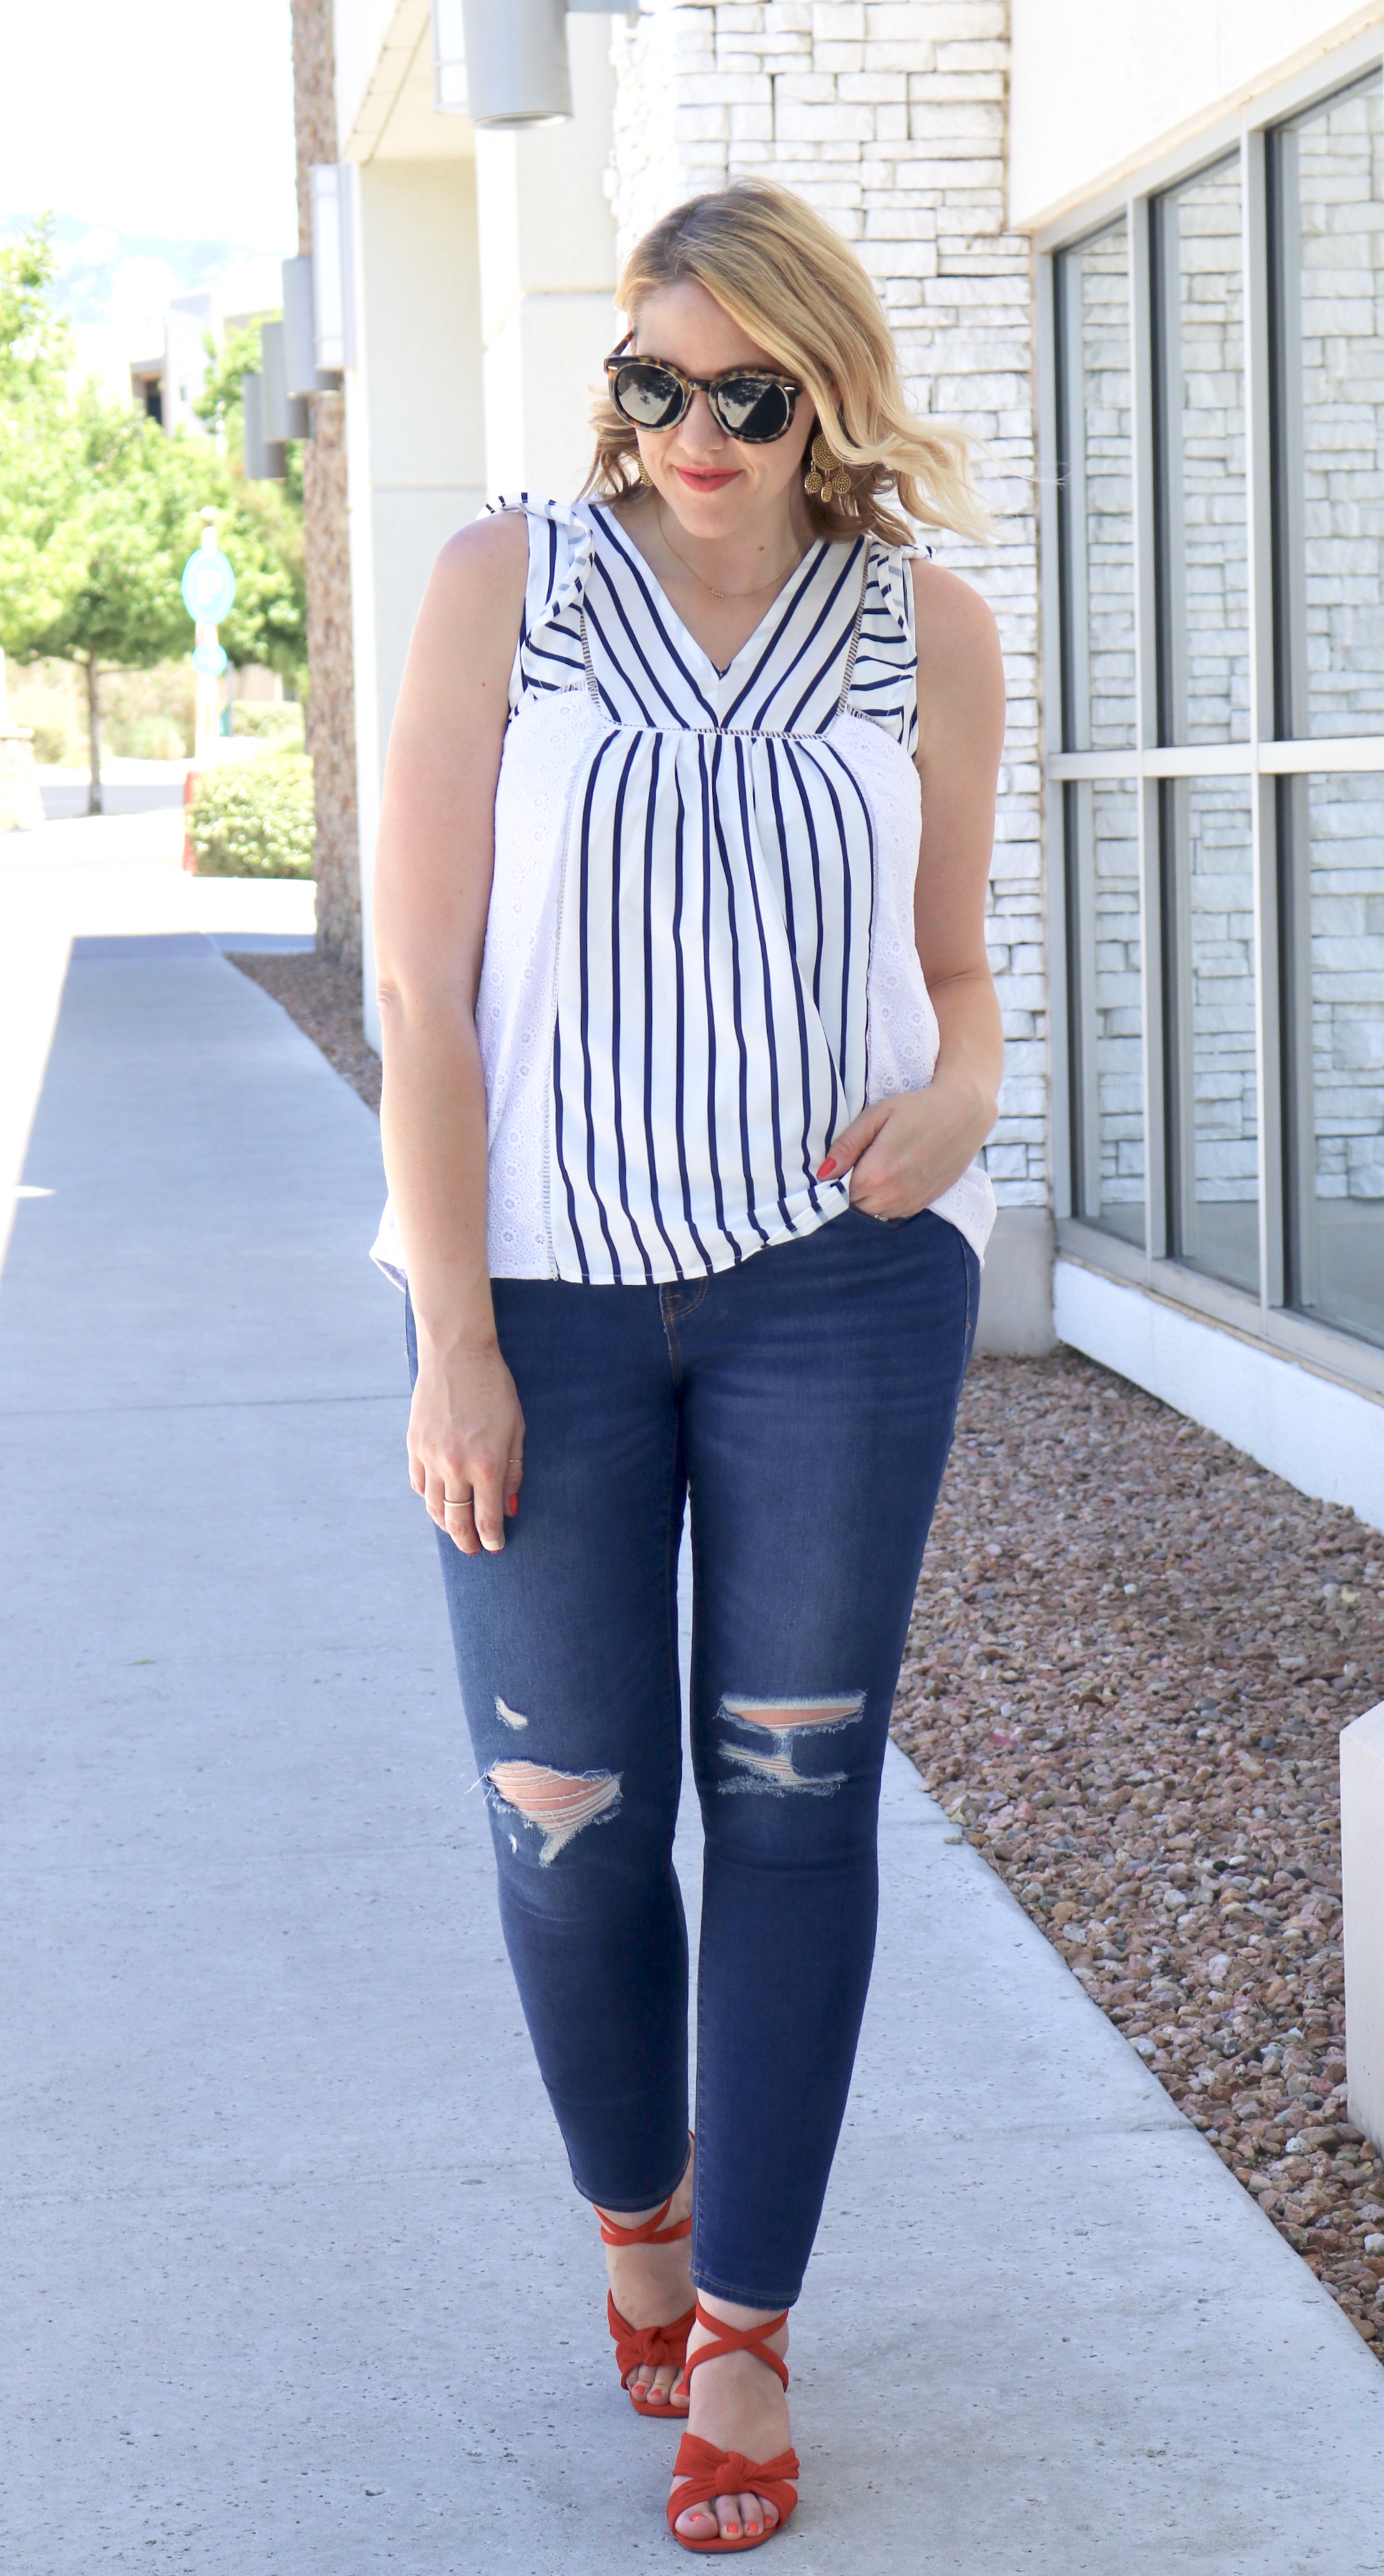 fourth of july outfit ideas #fourthofjuly #summerstyle #summer #outfitideas